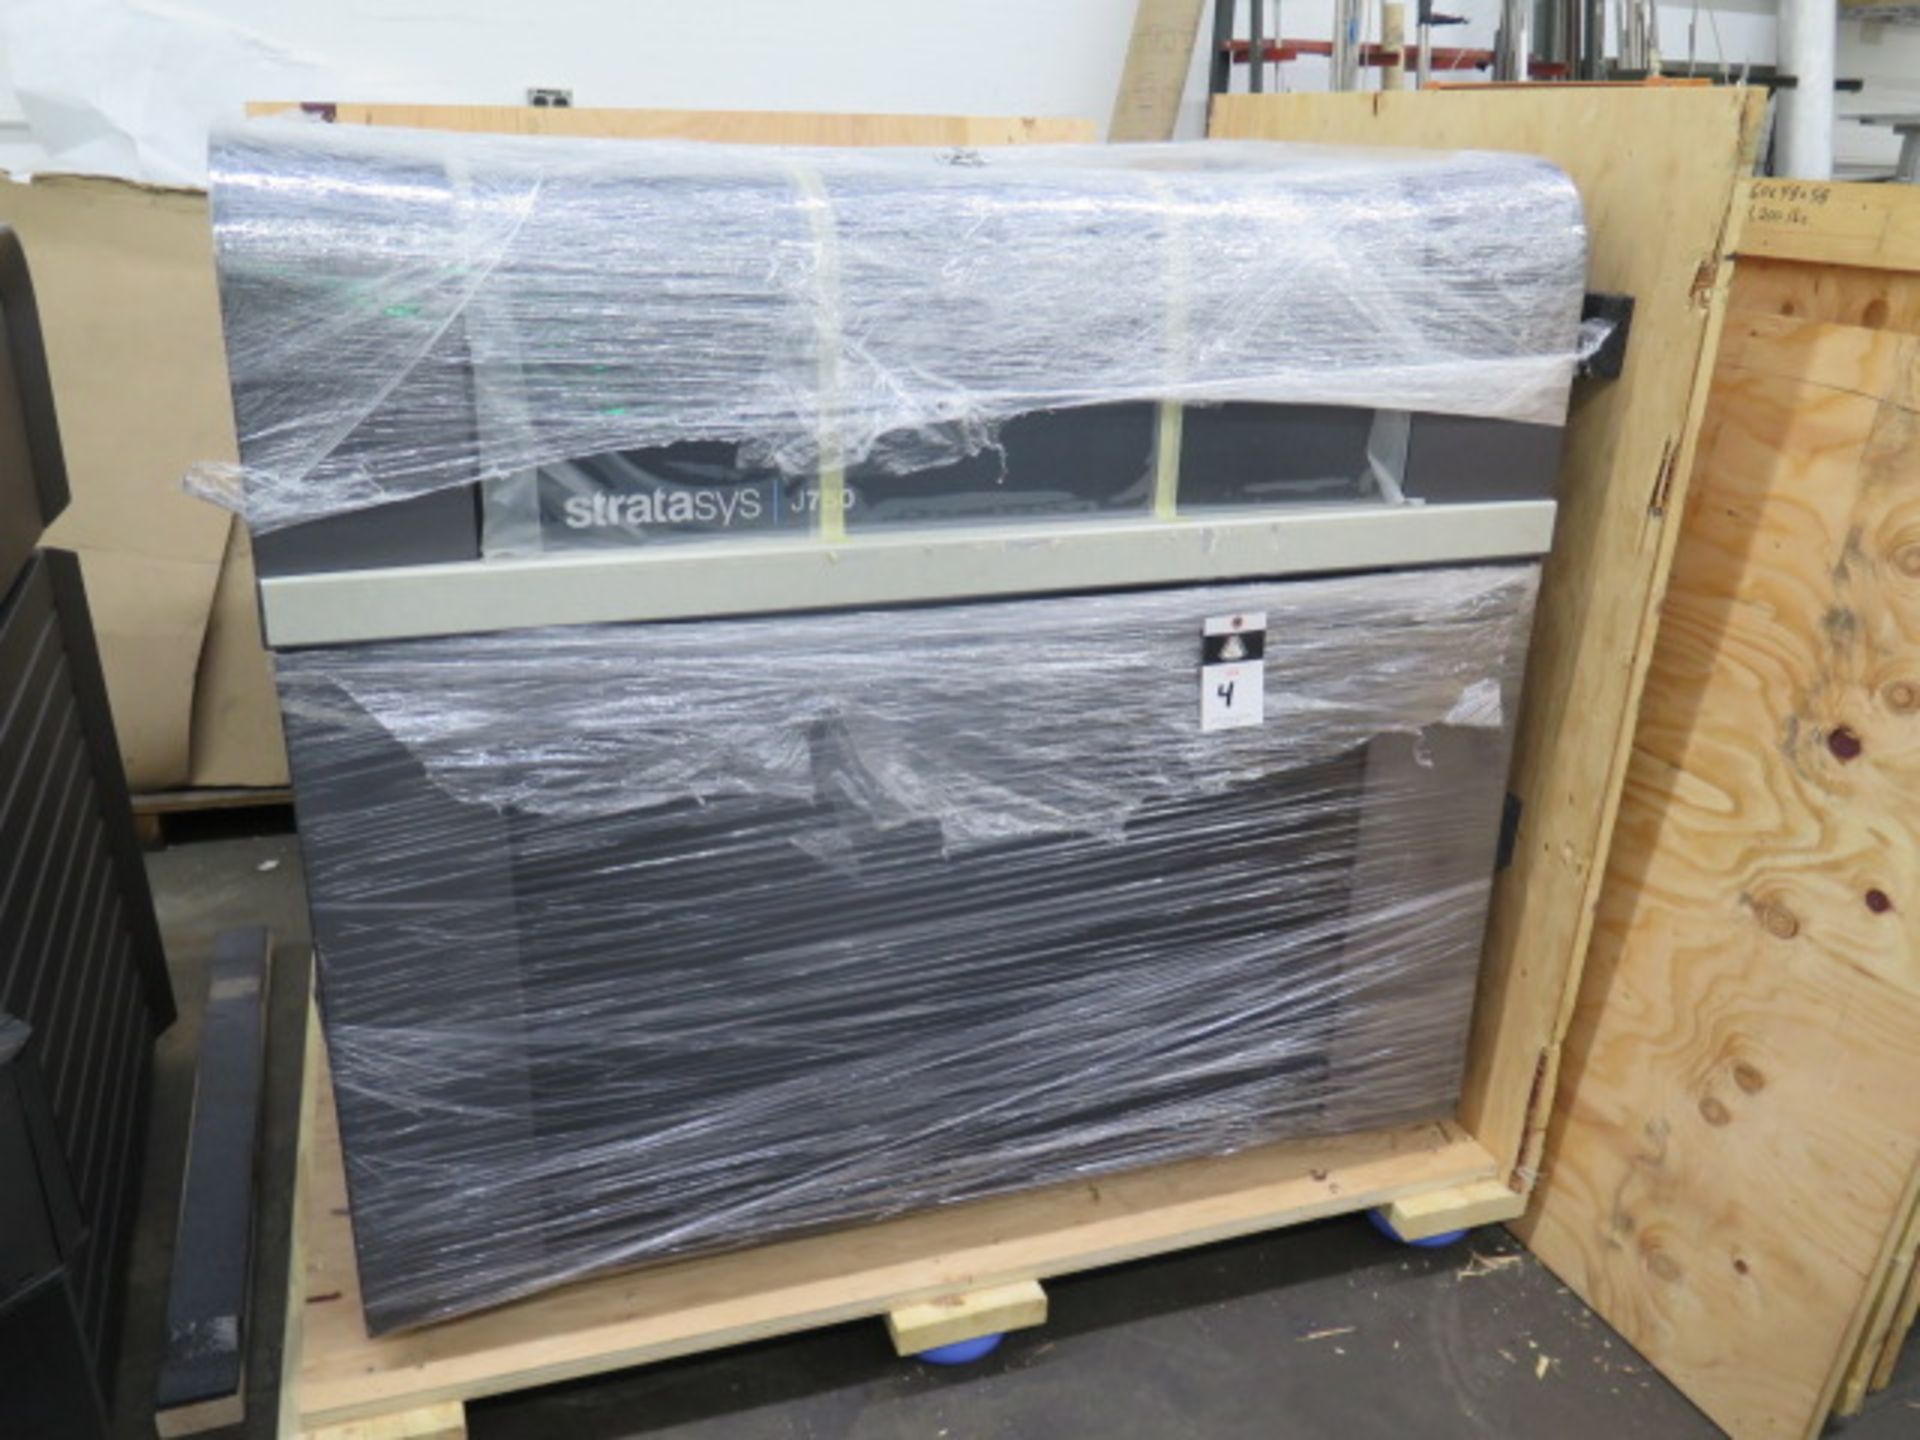 2019 Stratasys J750 Full Color – Multi Material 3D Printer s/n 8500561 NEW IN CRATE, SOLD AS IS - Image 3 of 35